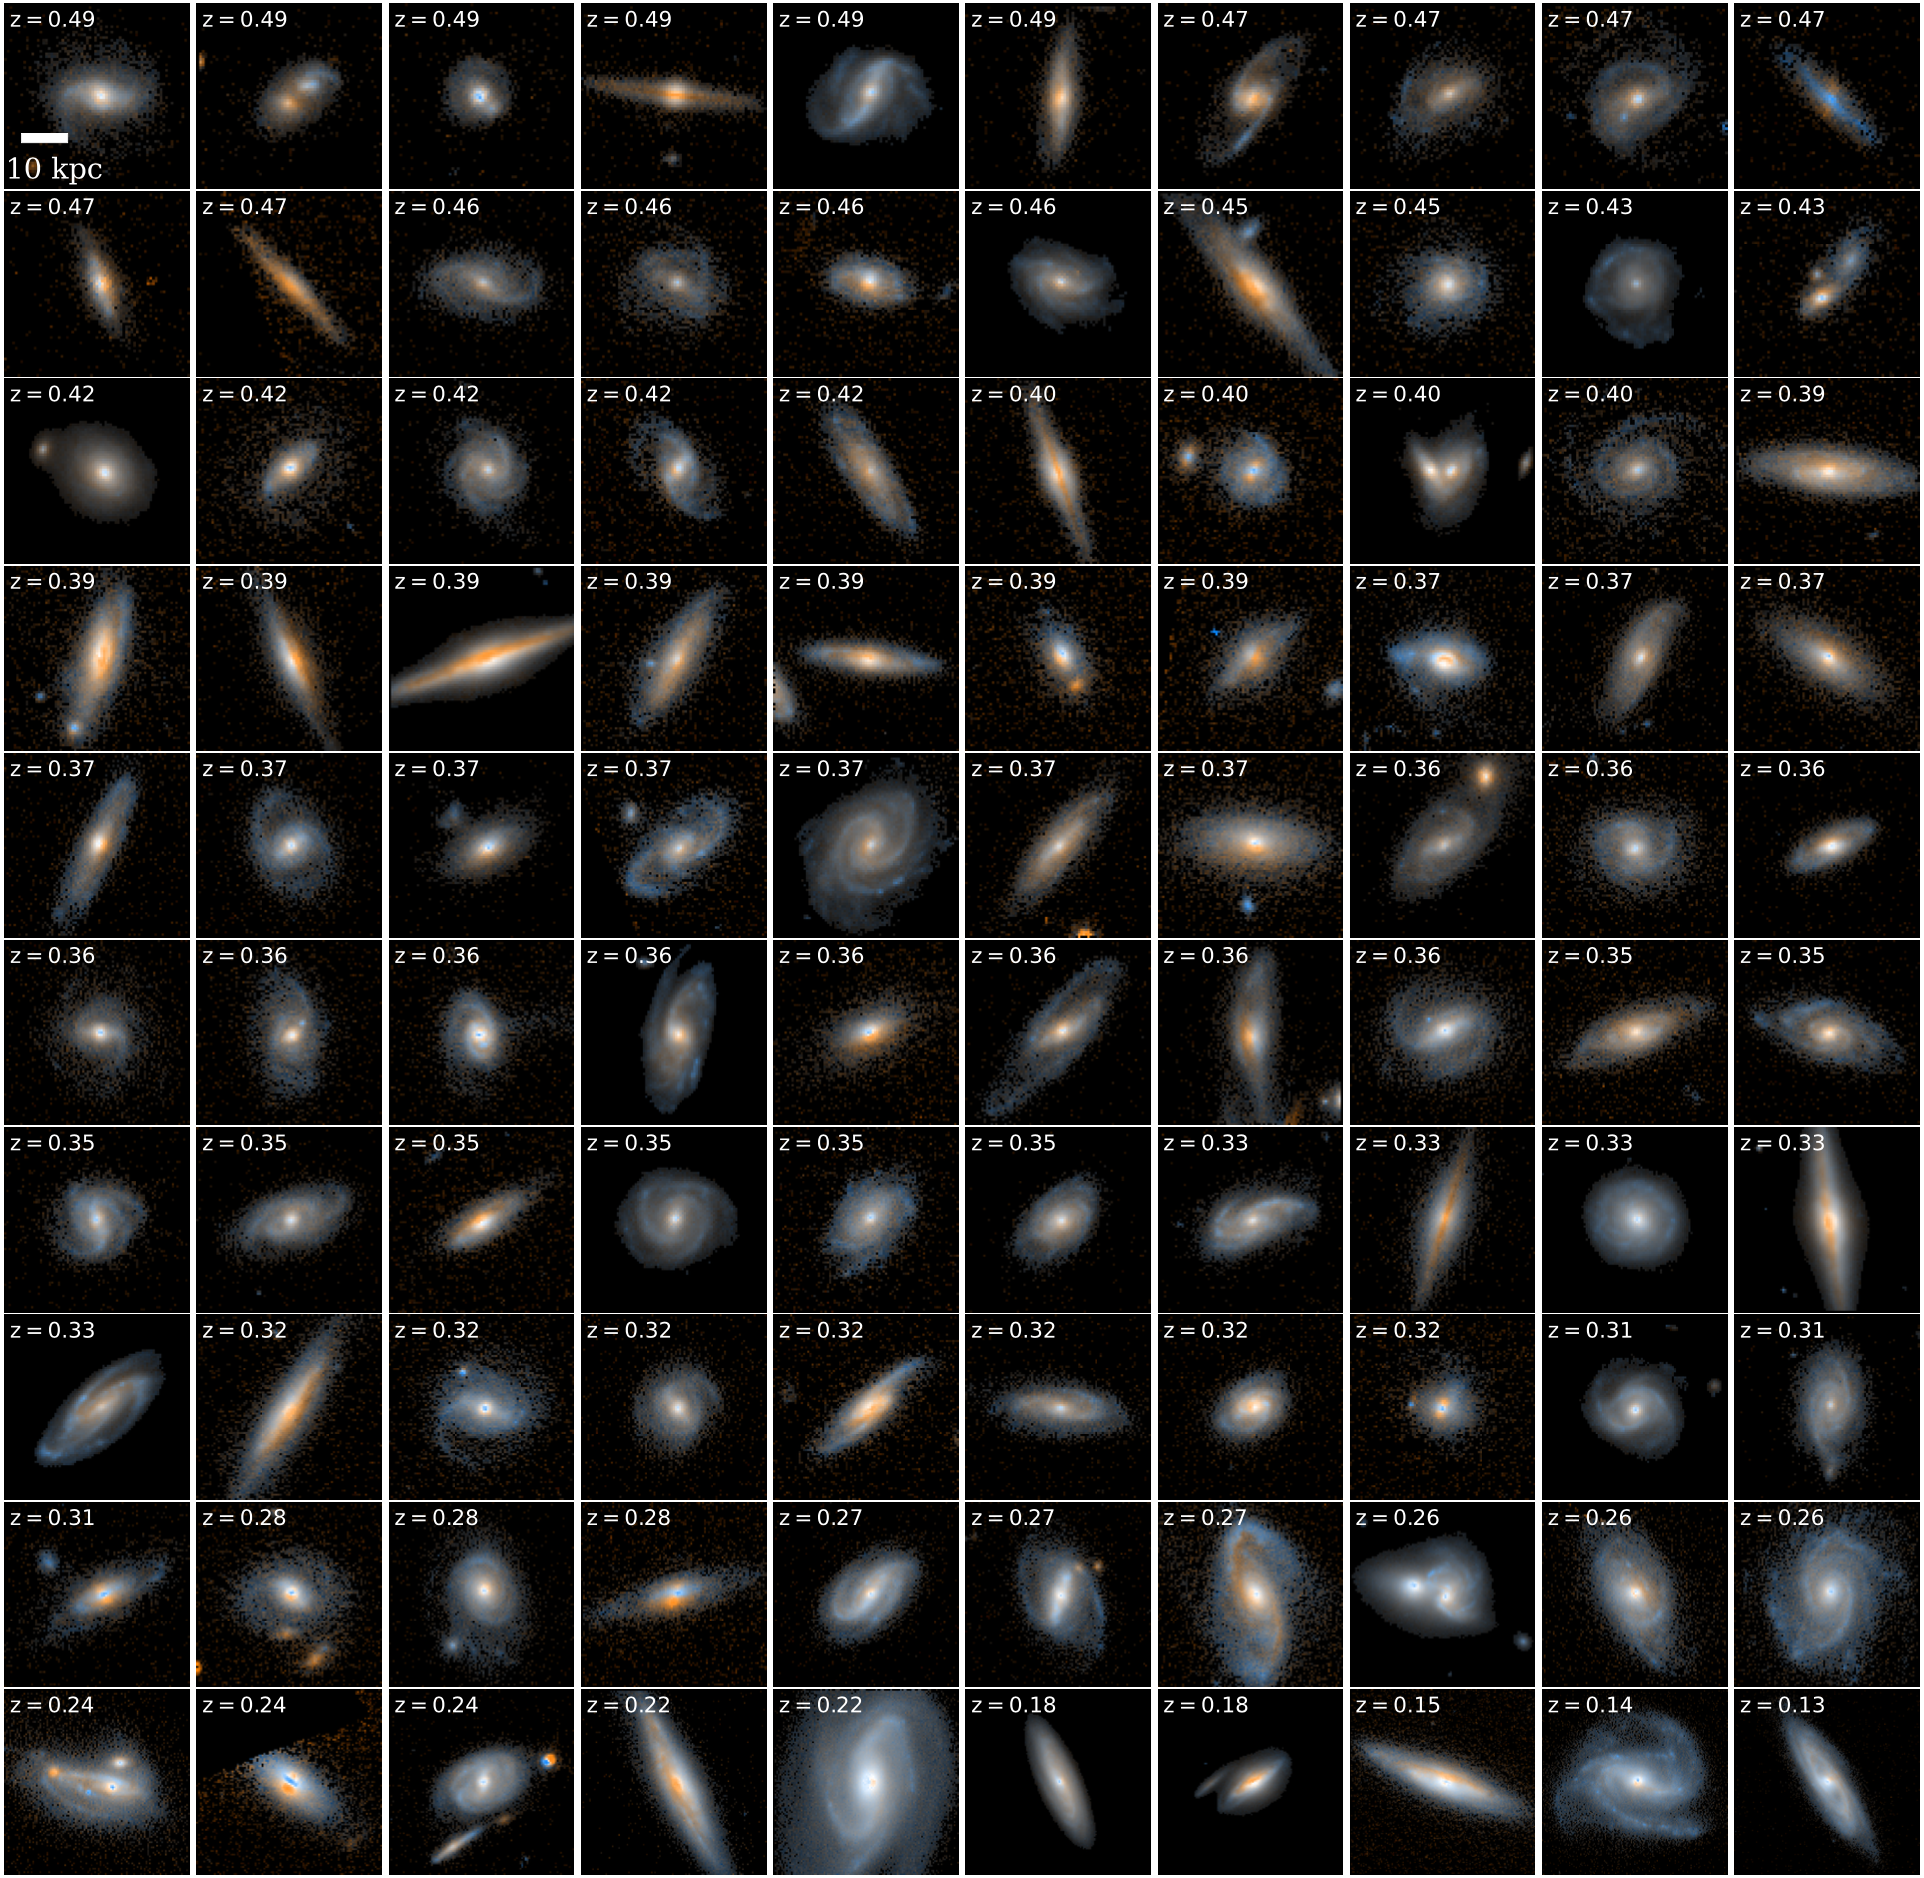 100 stamp images of galaxies showing a wide range of morphologies.